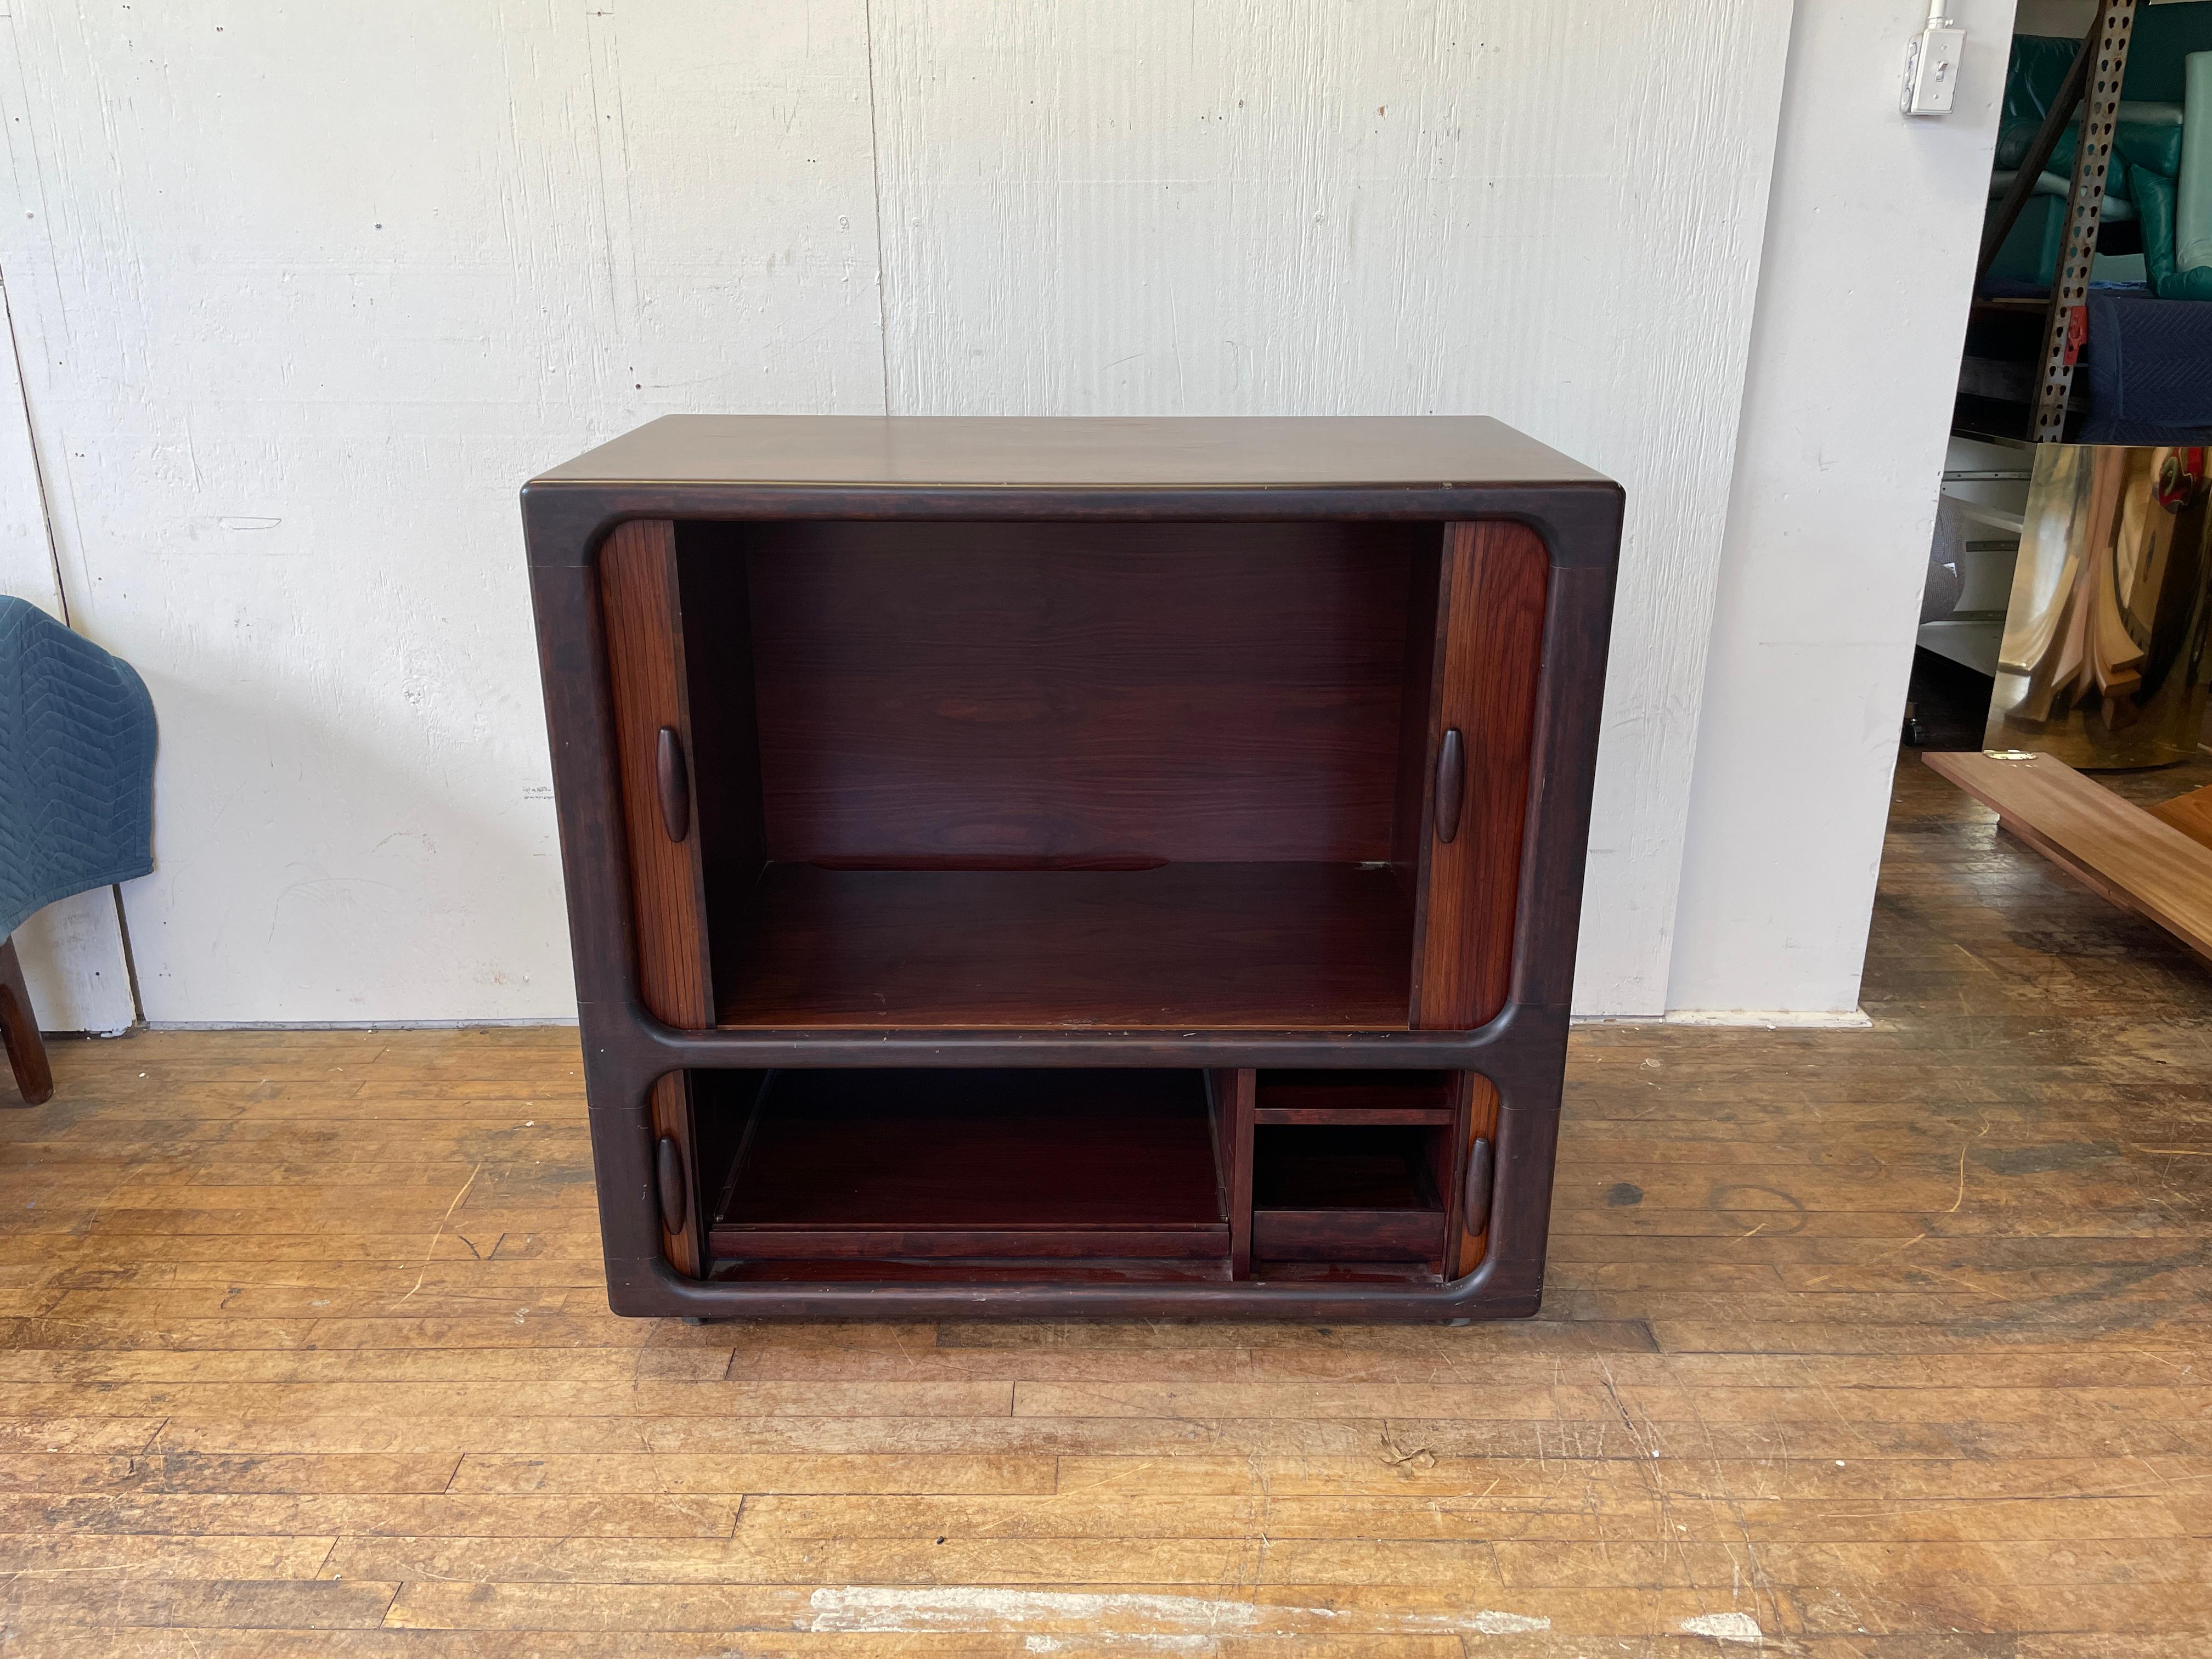 A stunning midcentury Danish modern media cabinet attributed to Dyrlund. The cabinet features two tambour door compartments for all your storage needs. Factory-made cutouts in the back allow for convenient cable management. This piece would function